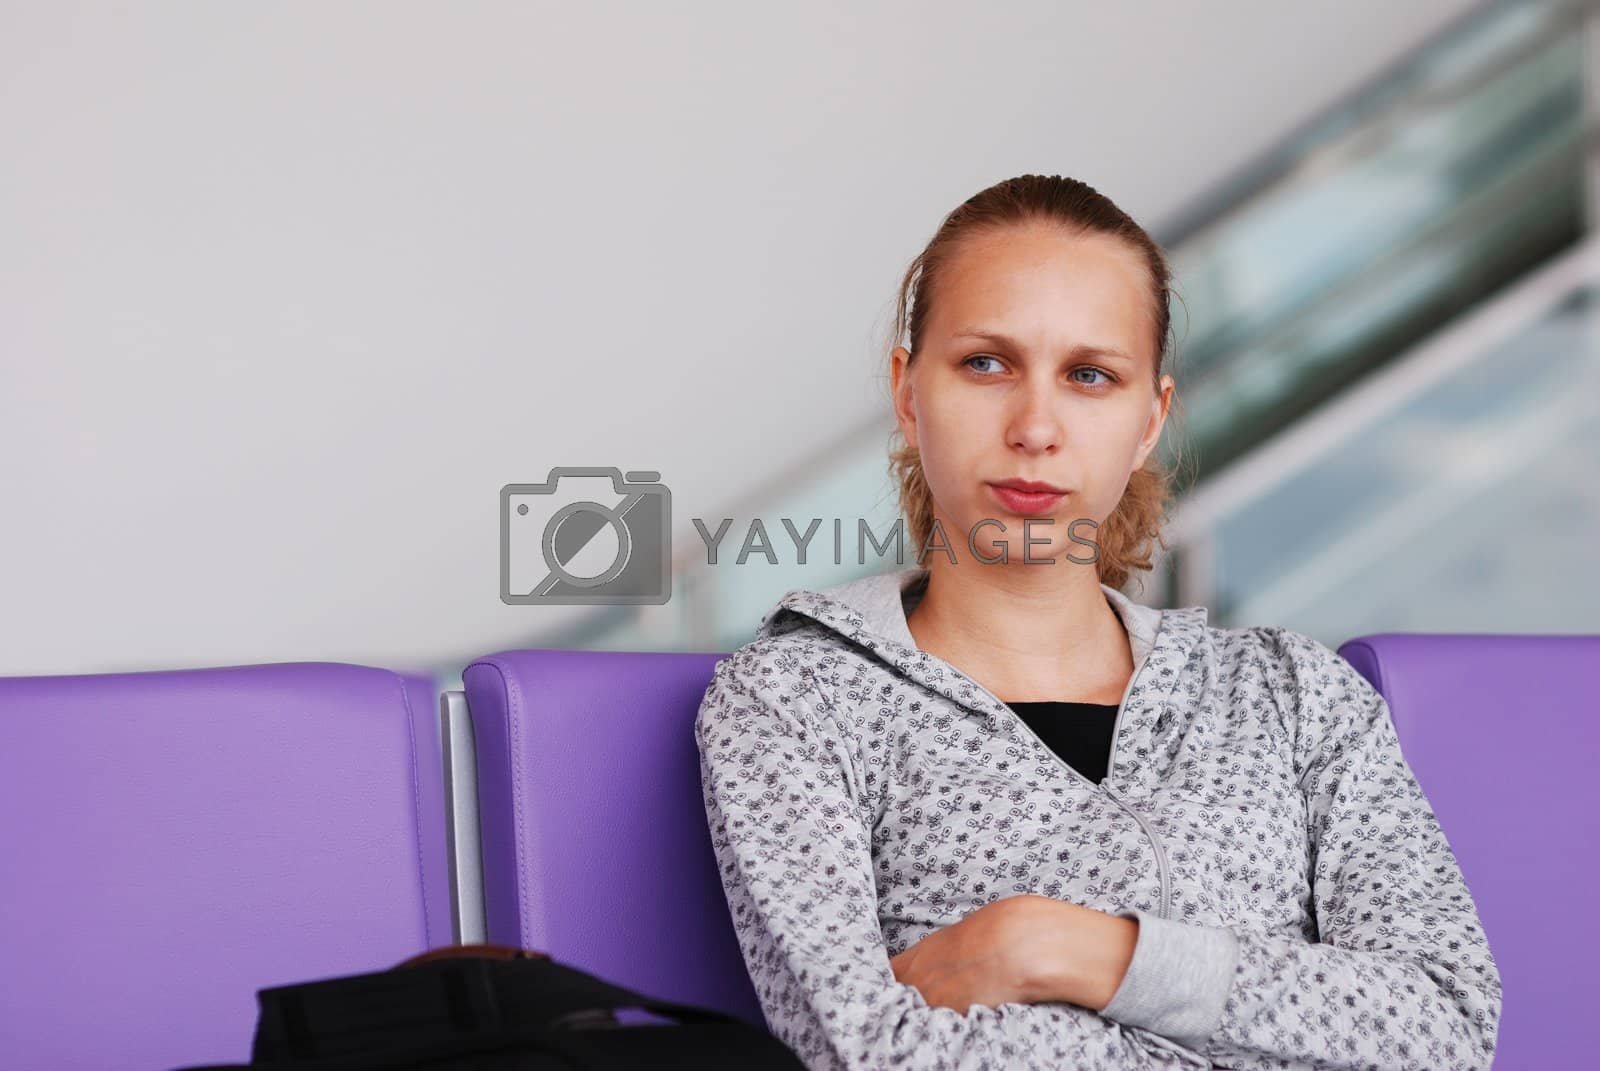 Royalty free image of Waiting for a flight by haveseen